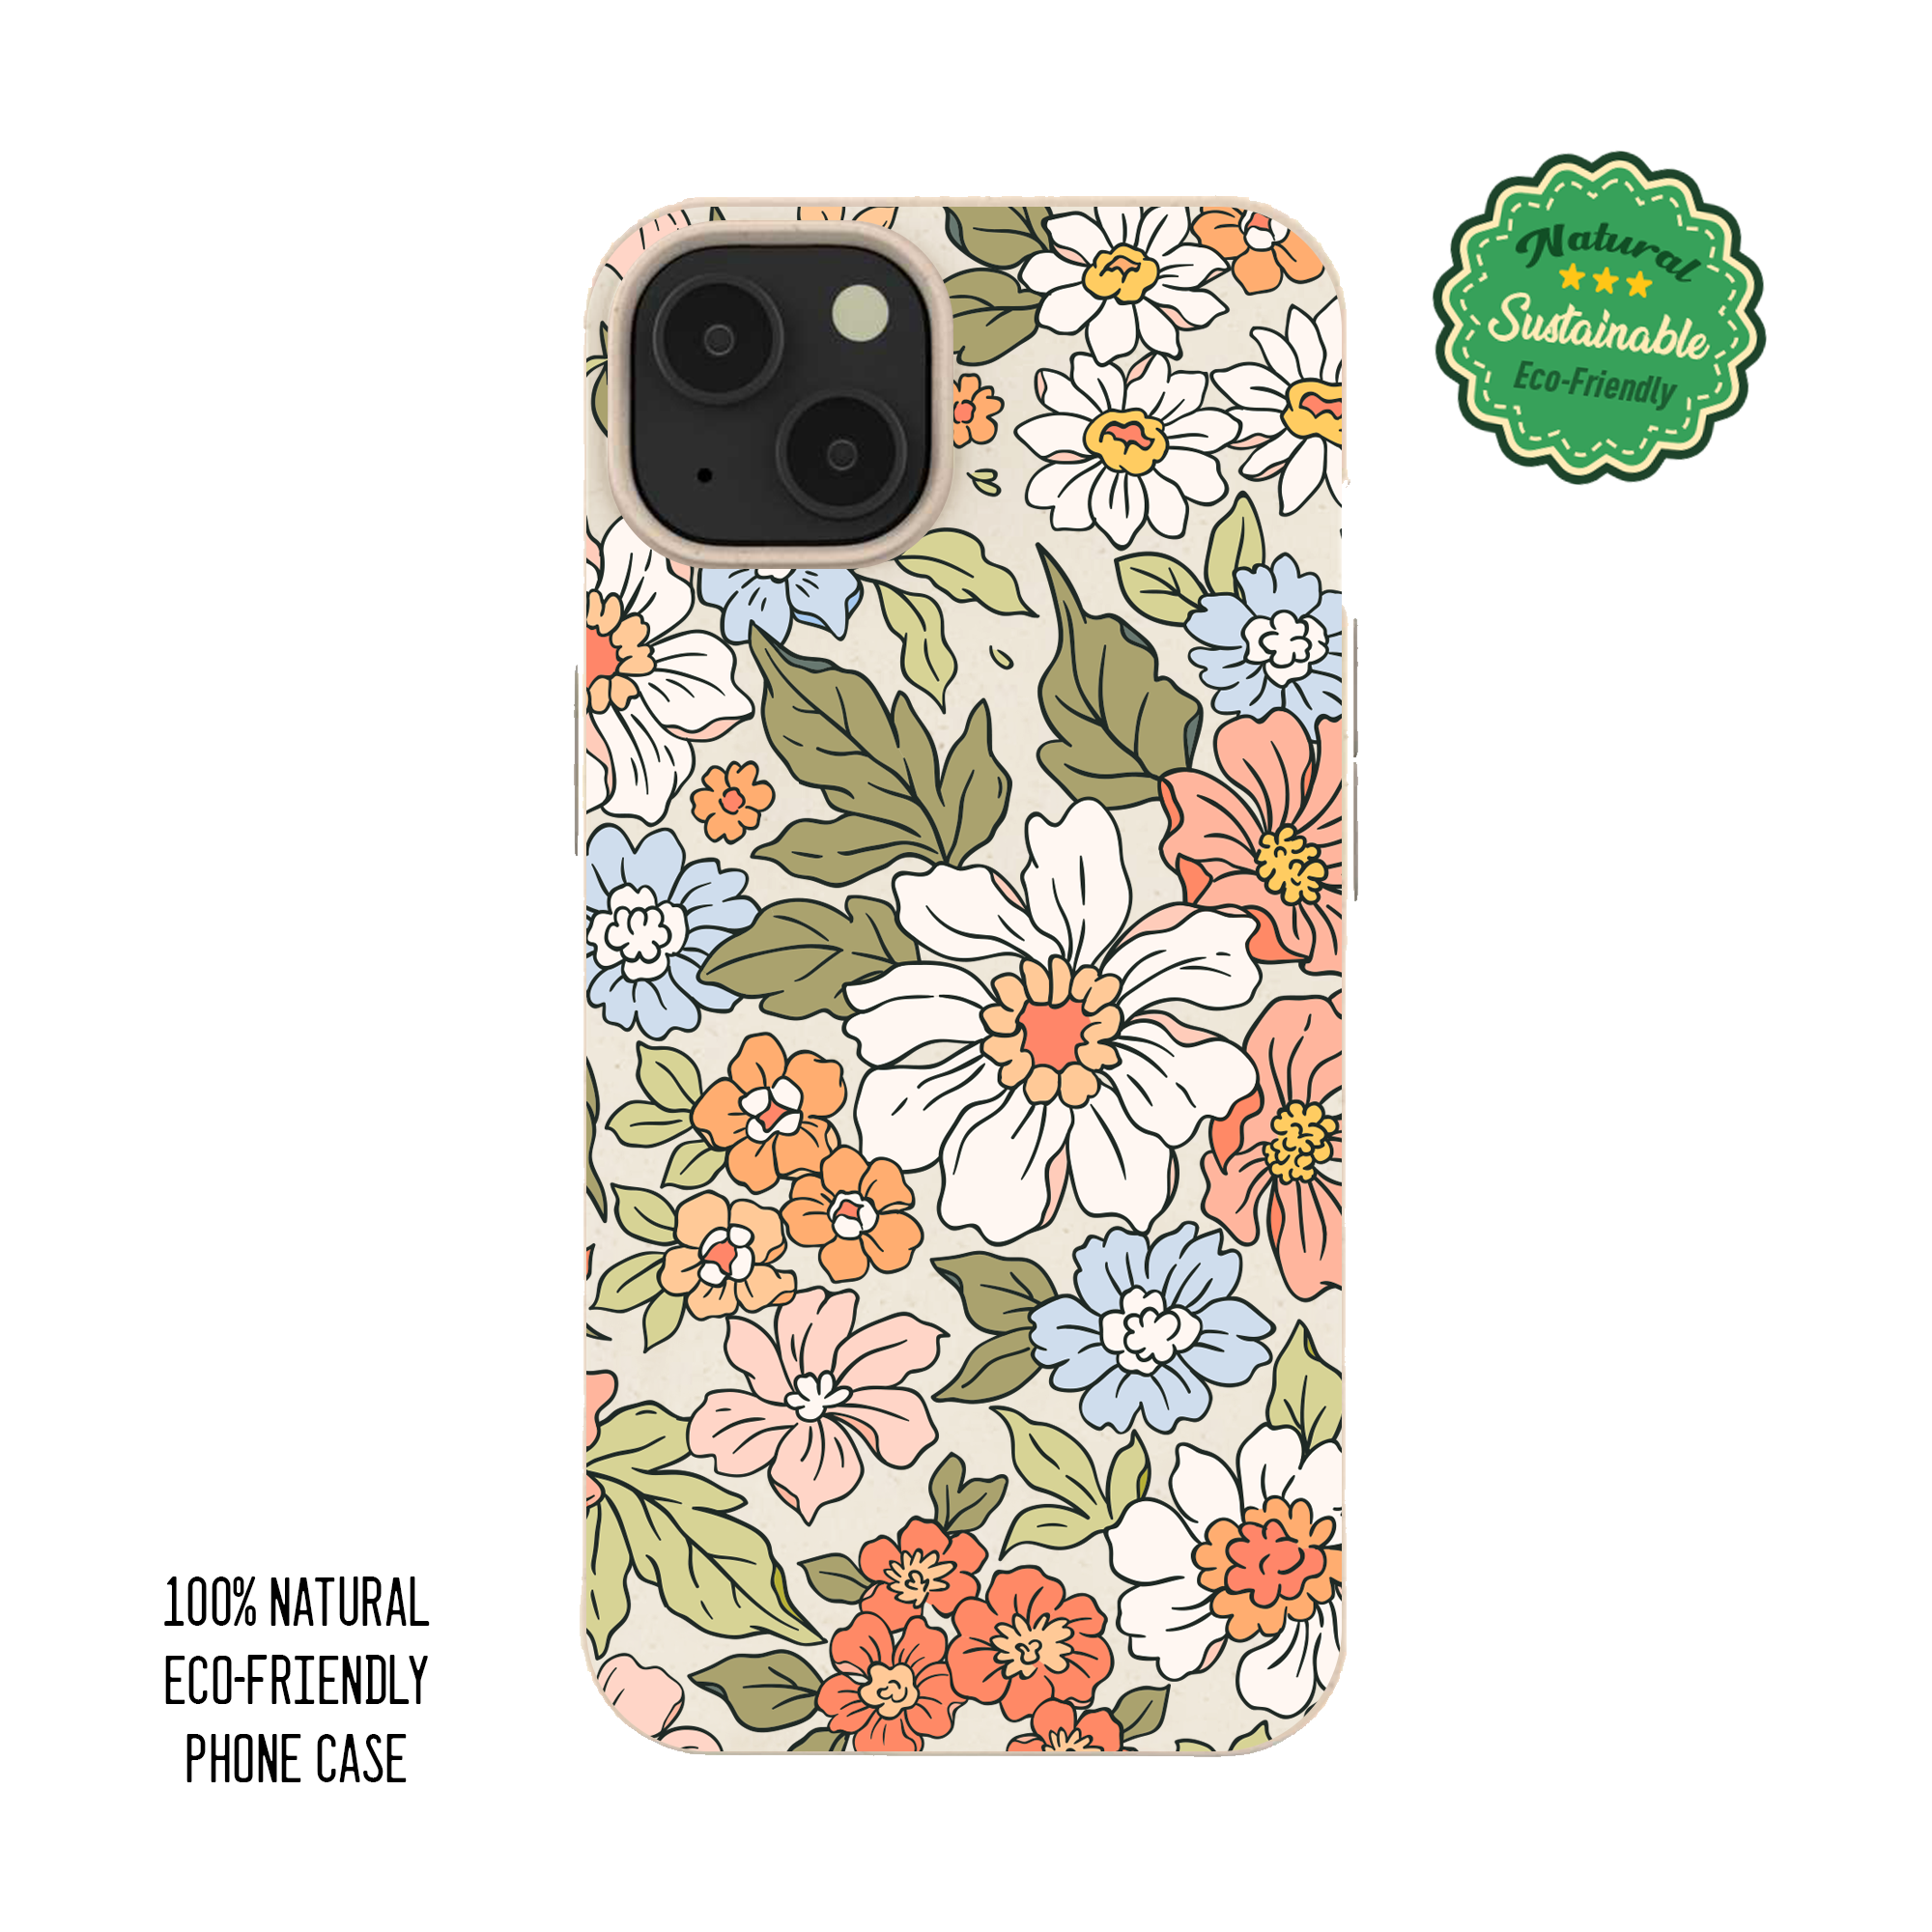 100% Compostable Biodegradable Eco-Friendly Floral Phone Case for iPhone 11  Pro. FREE SHIPPING